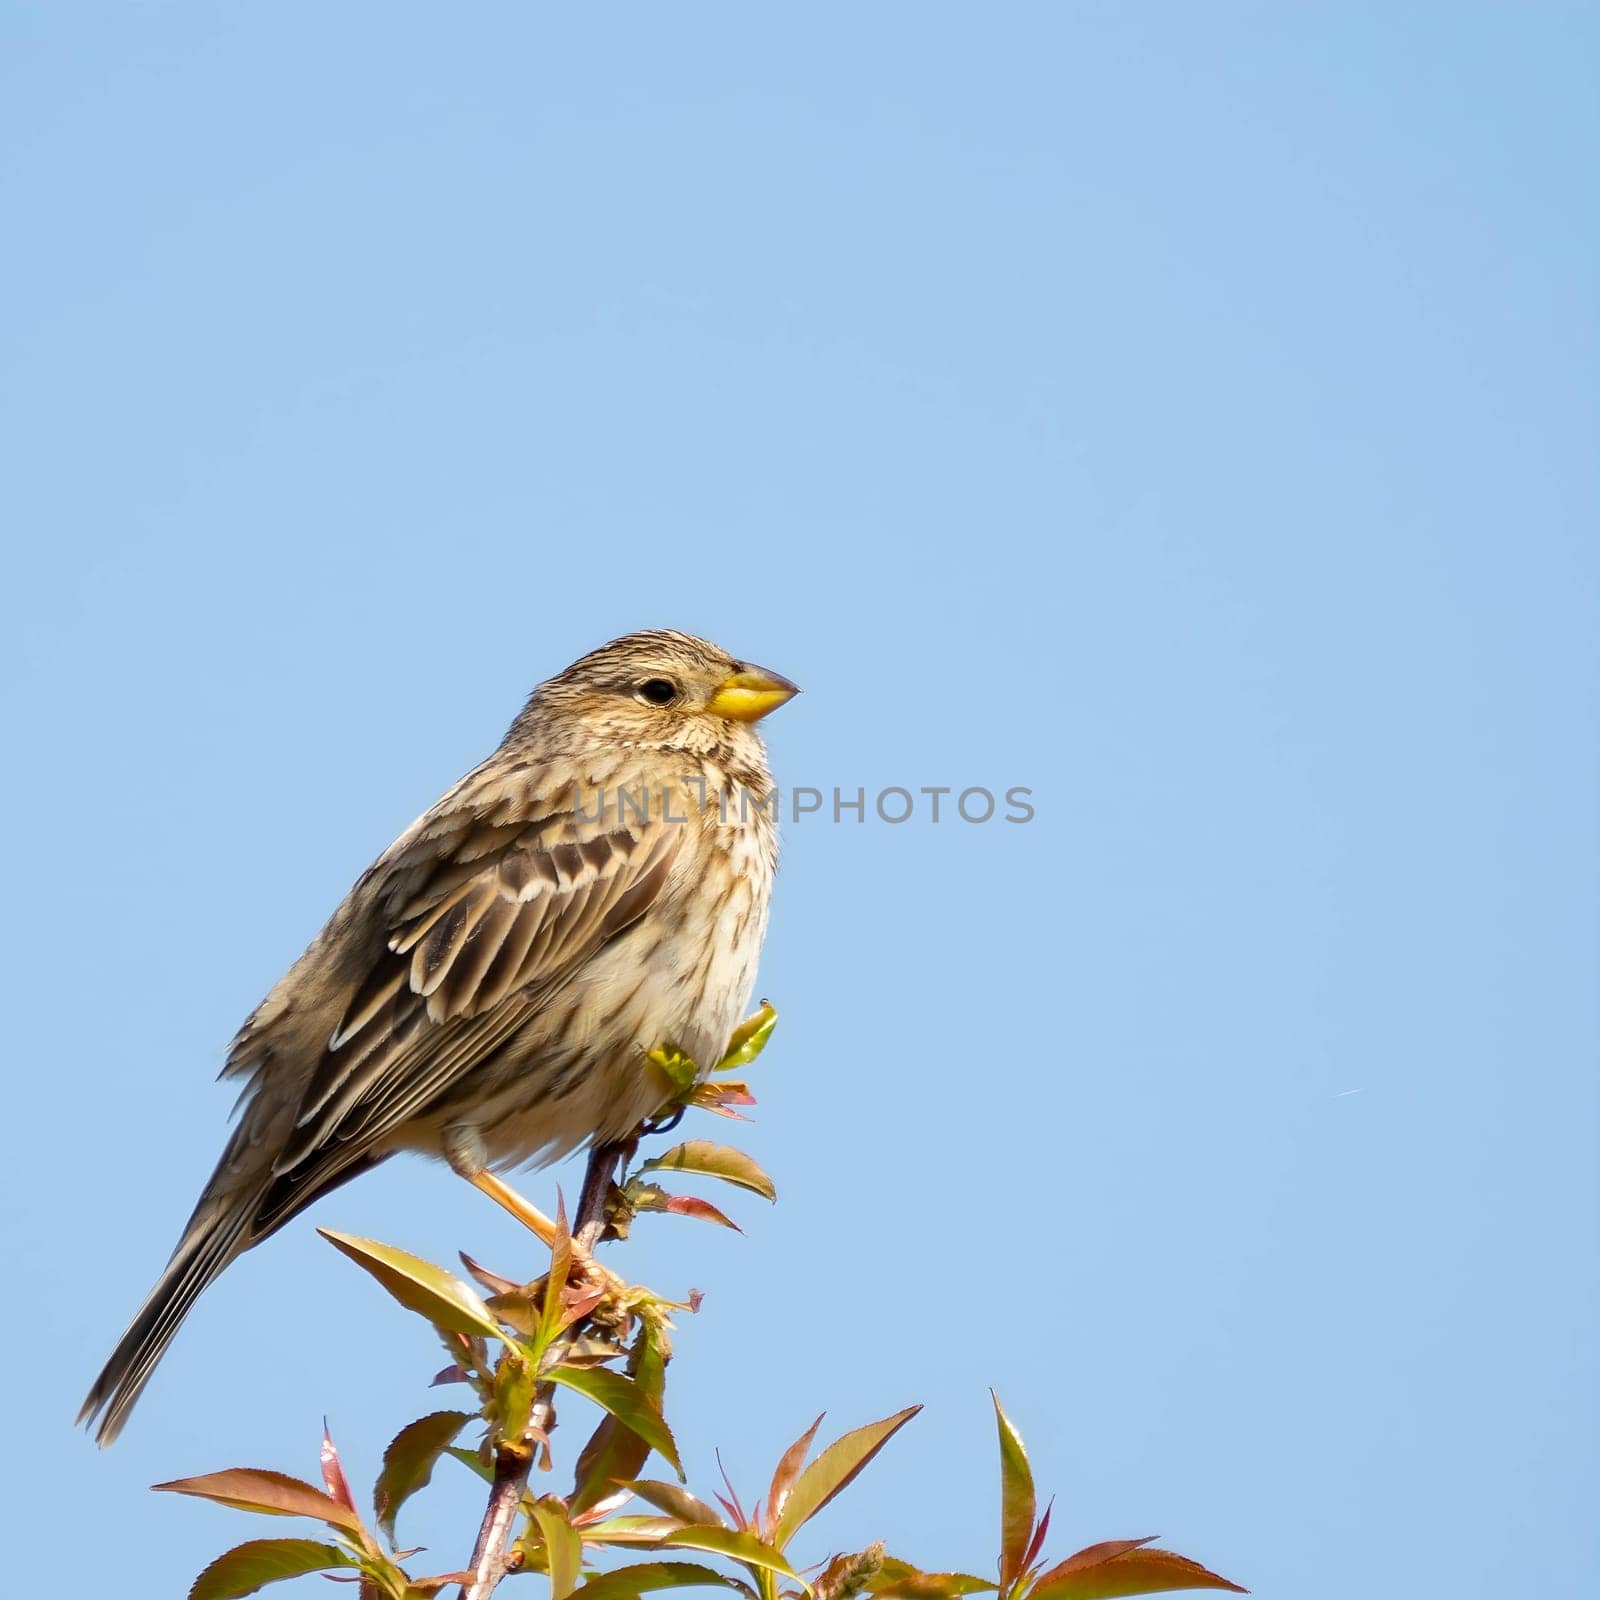 Corn bunting on a twig, close-up photo against the sky. by NatureTron